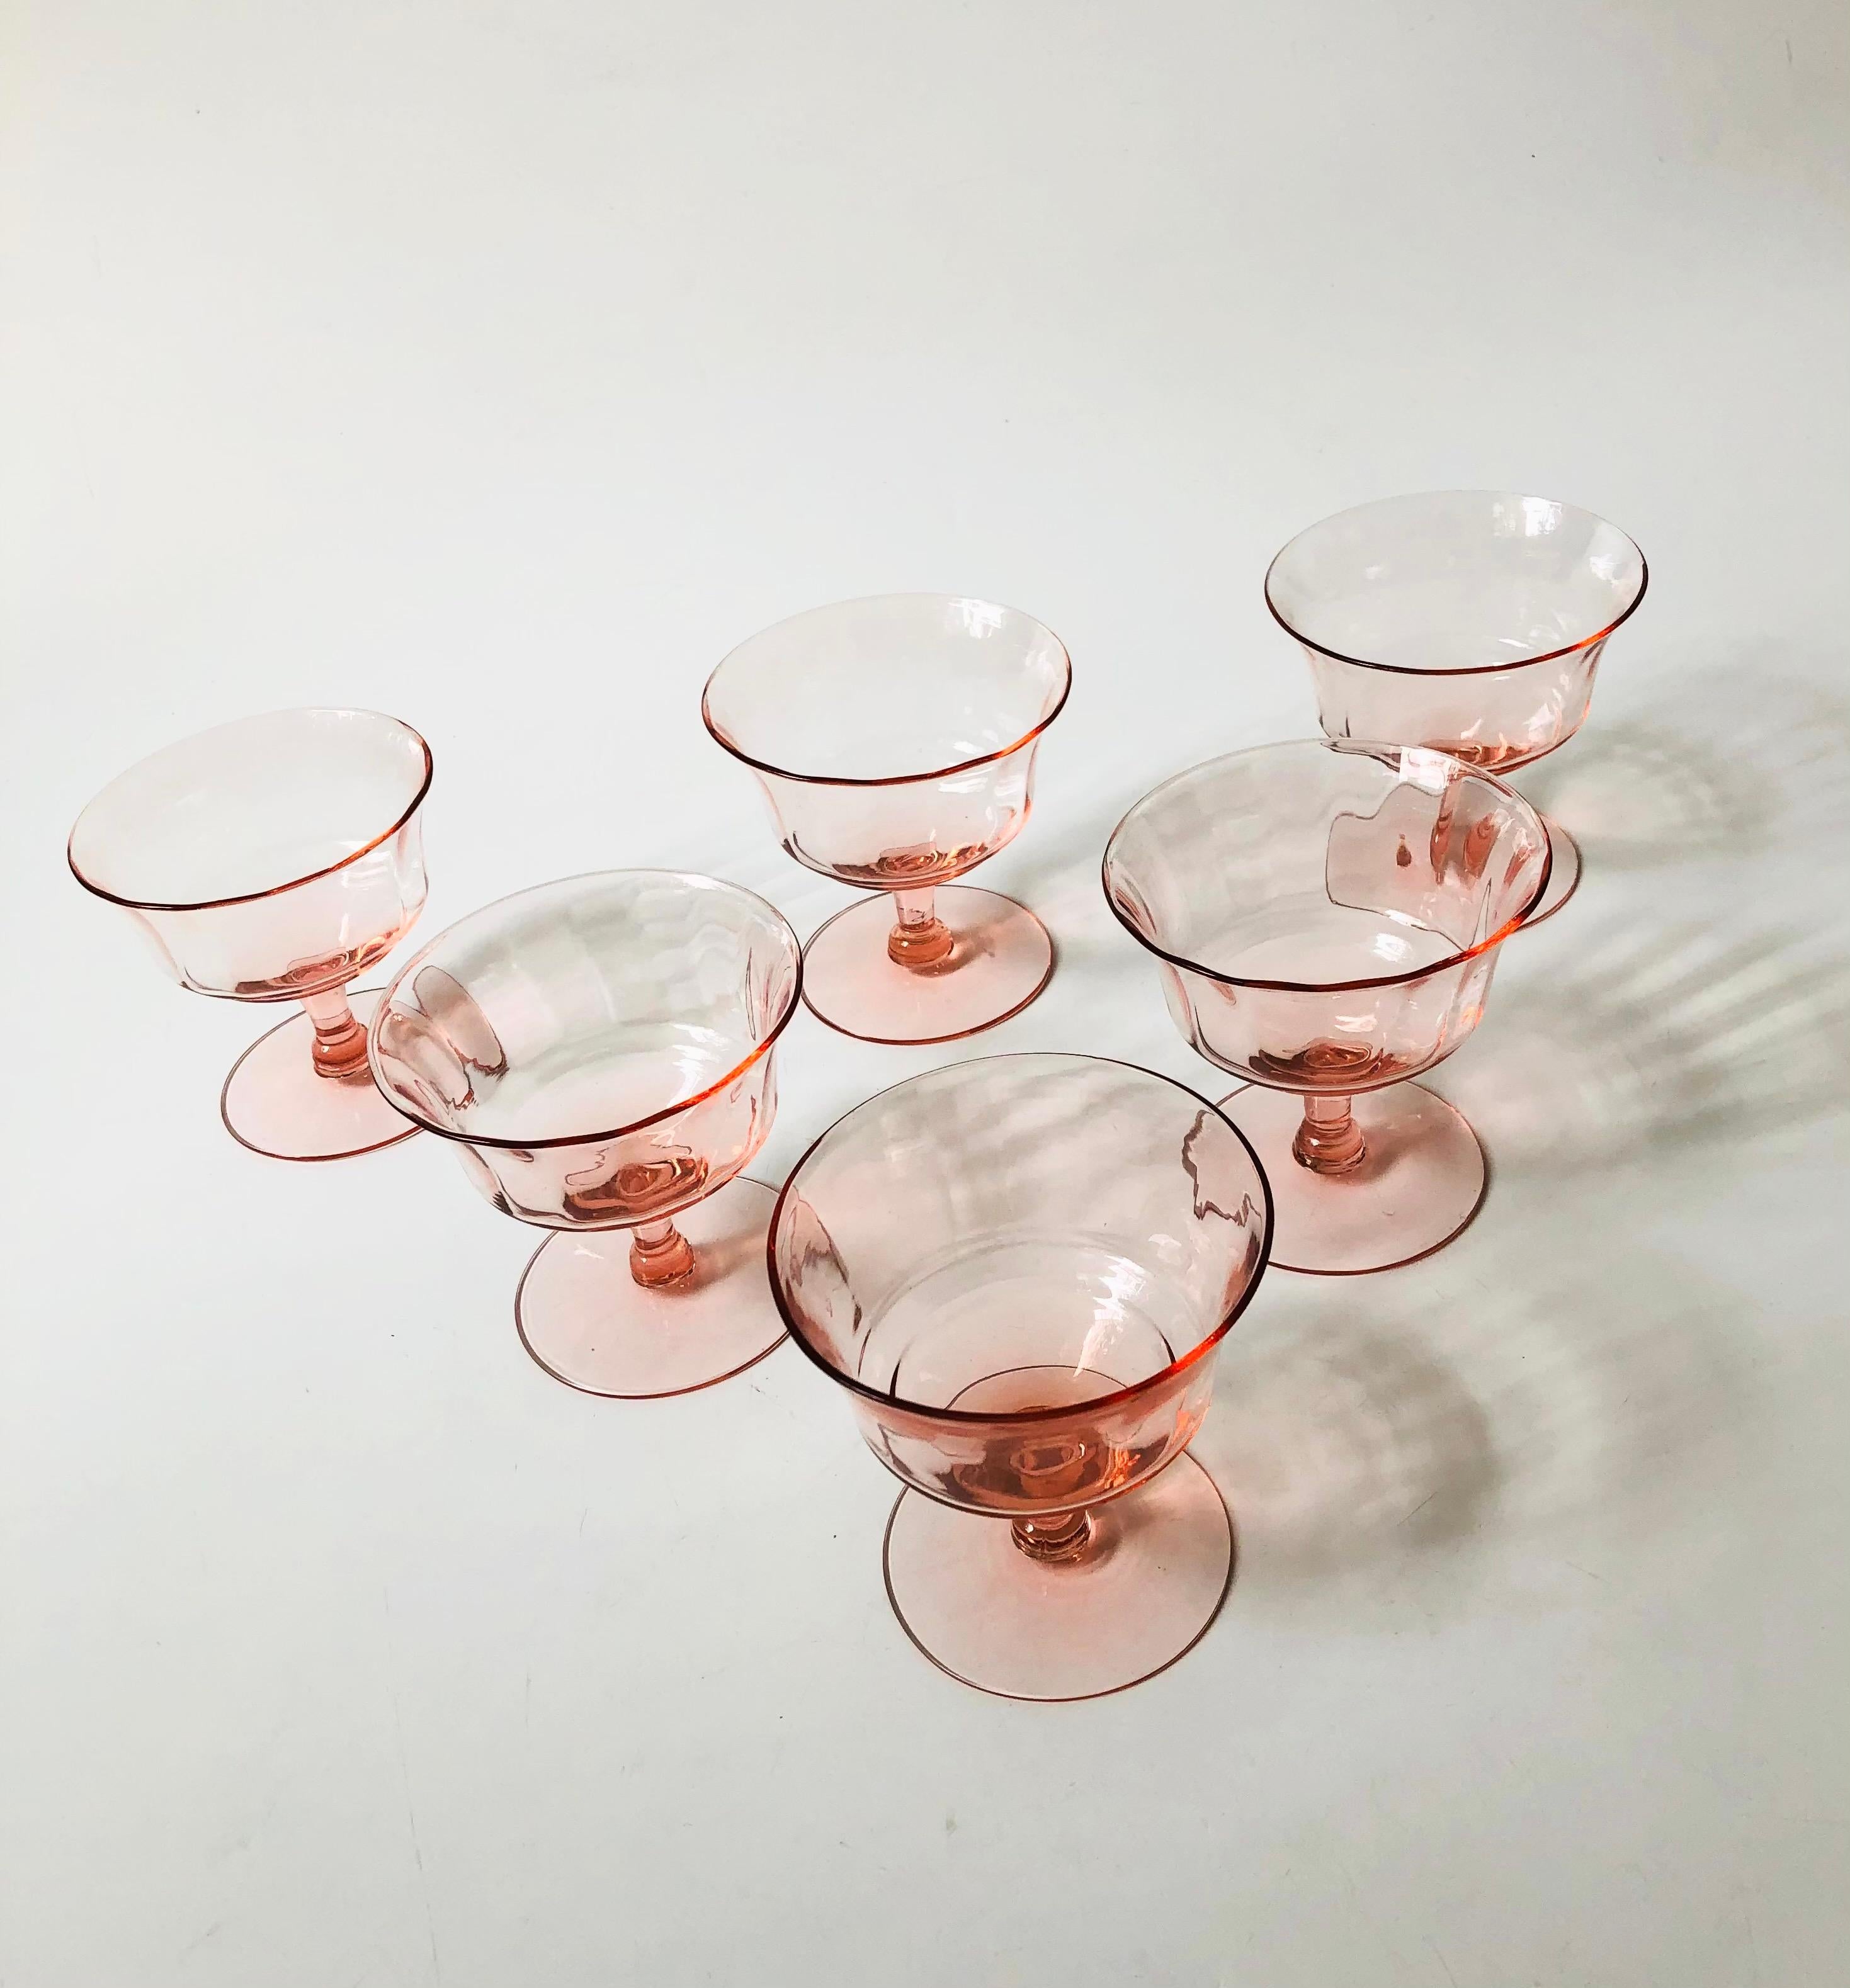 A set of 6 vintage coupe glasses in a pale blush pink hue. Made of delicate thin glass with a lovely light texture. Perfect for champagne or wine.

